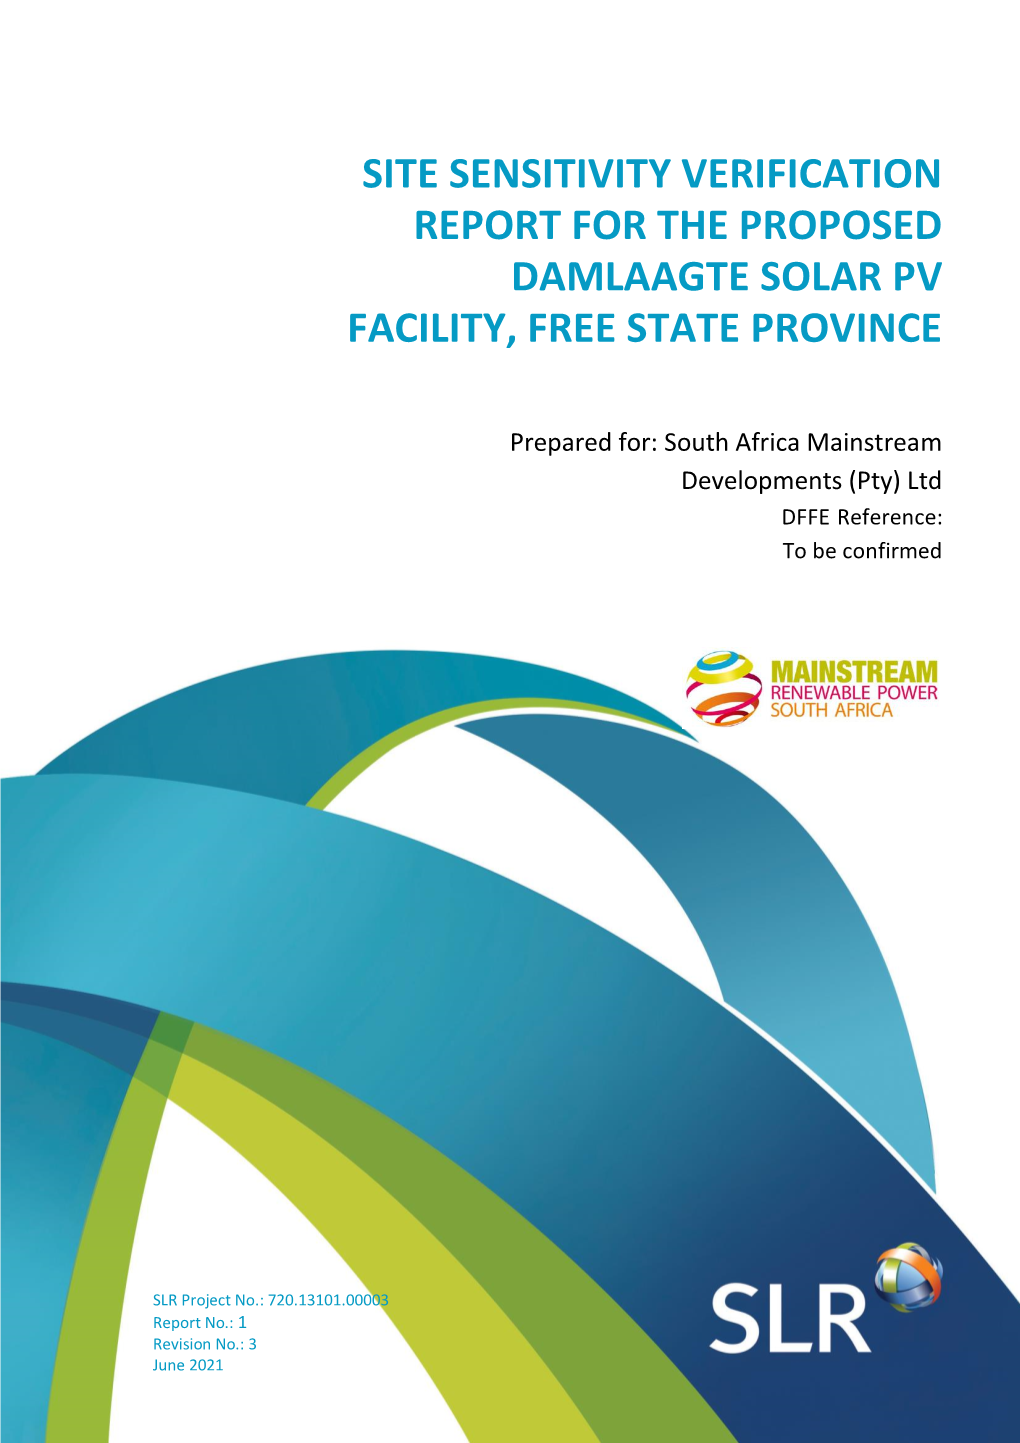 Site Sensitivity Verification Report for the Proposed Scafell Solar PV